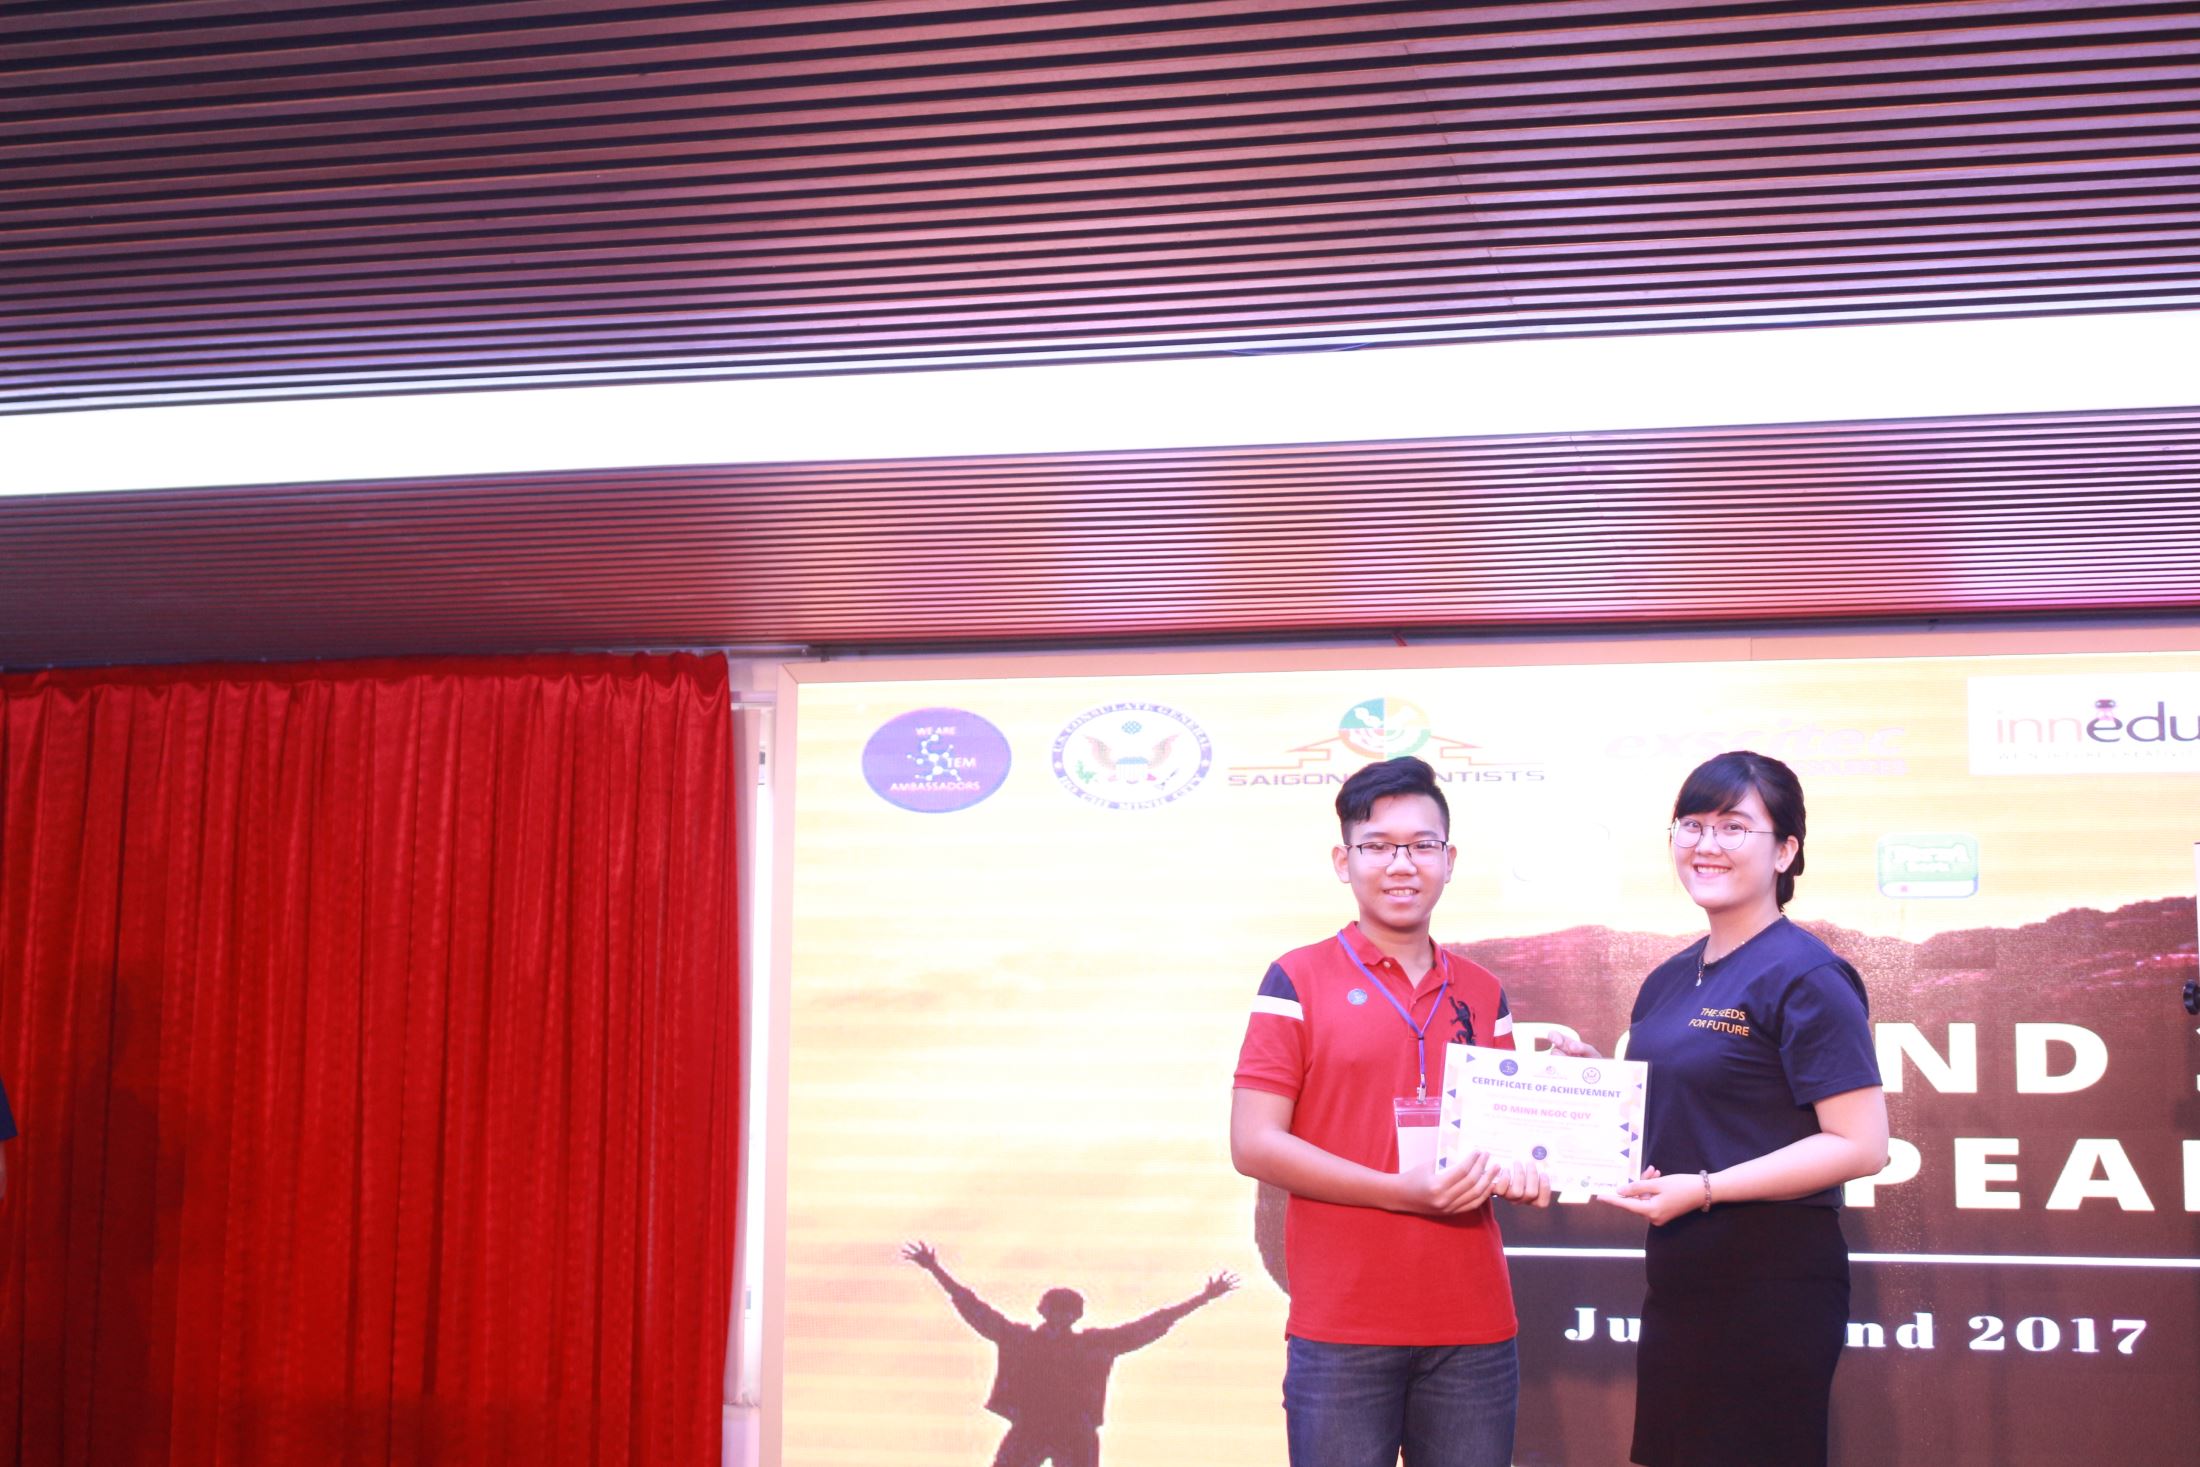 Jack Do Minh Ngoc Quy – grade 9 received Certification of STEM Ambassadors program sponsored by the US Consulate.